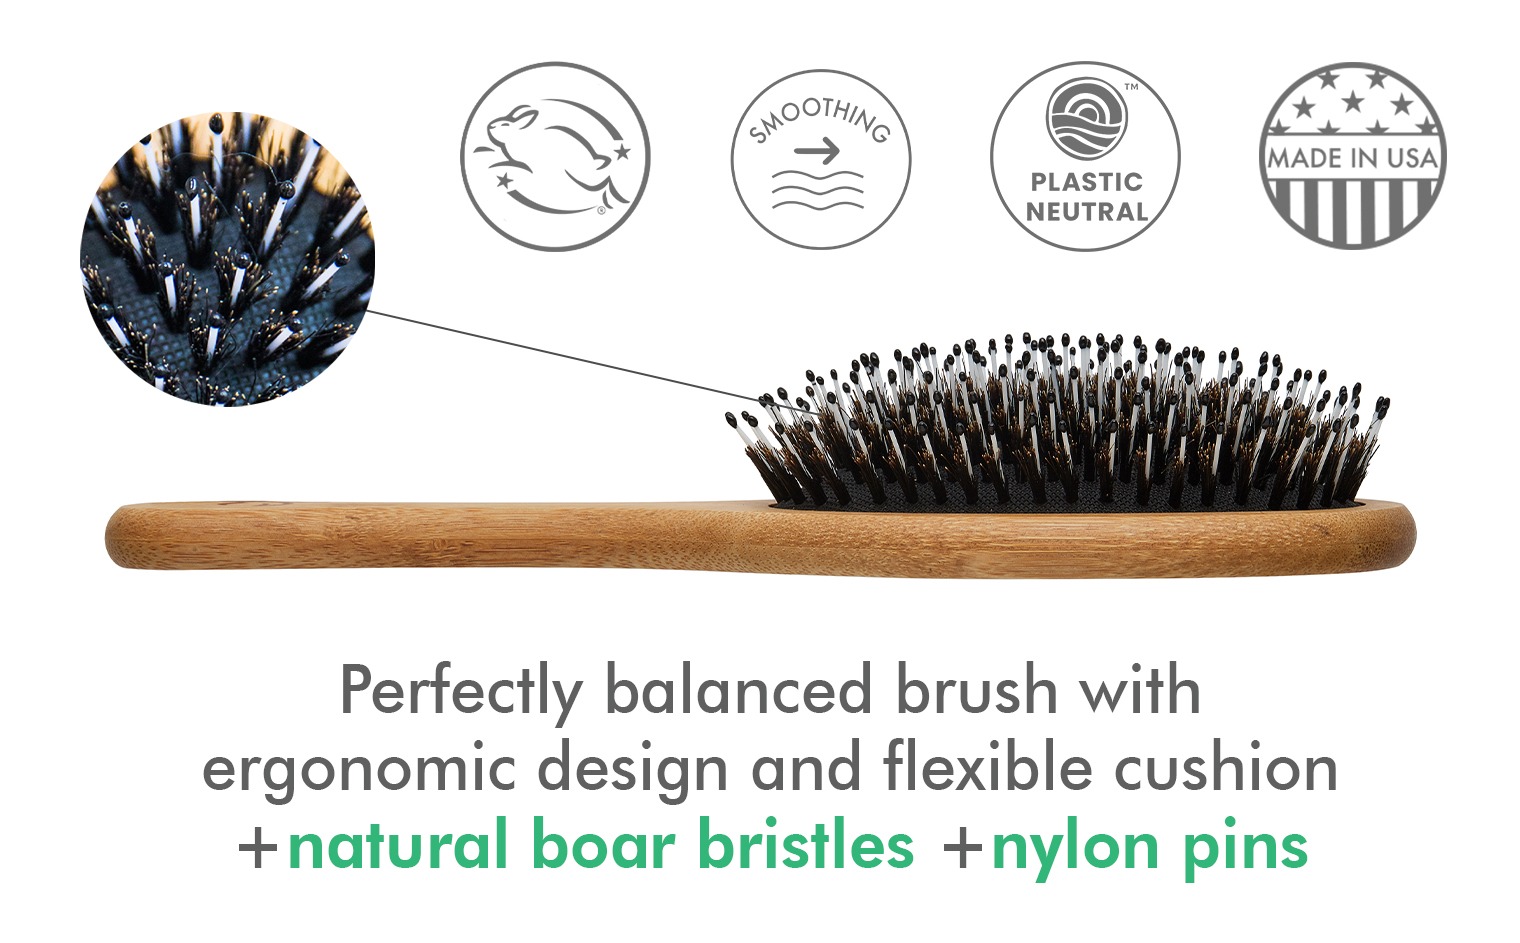 Beauty By Earth Boar Bristles Brush - key features 